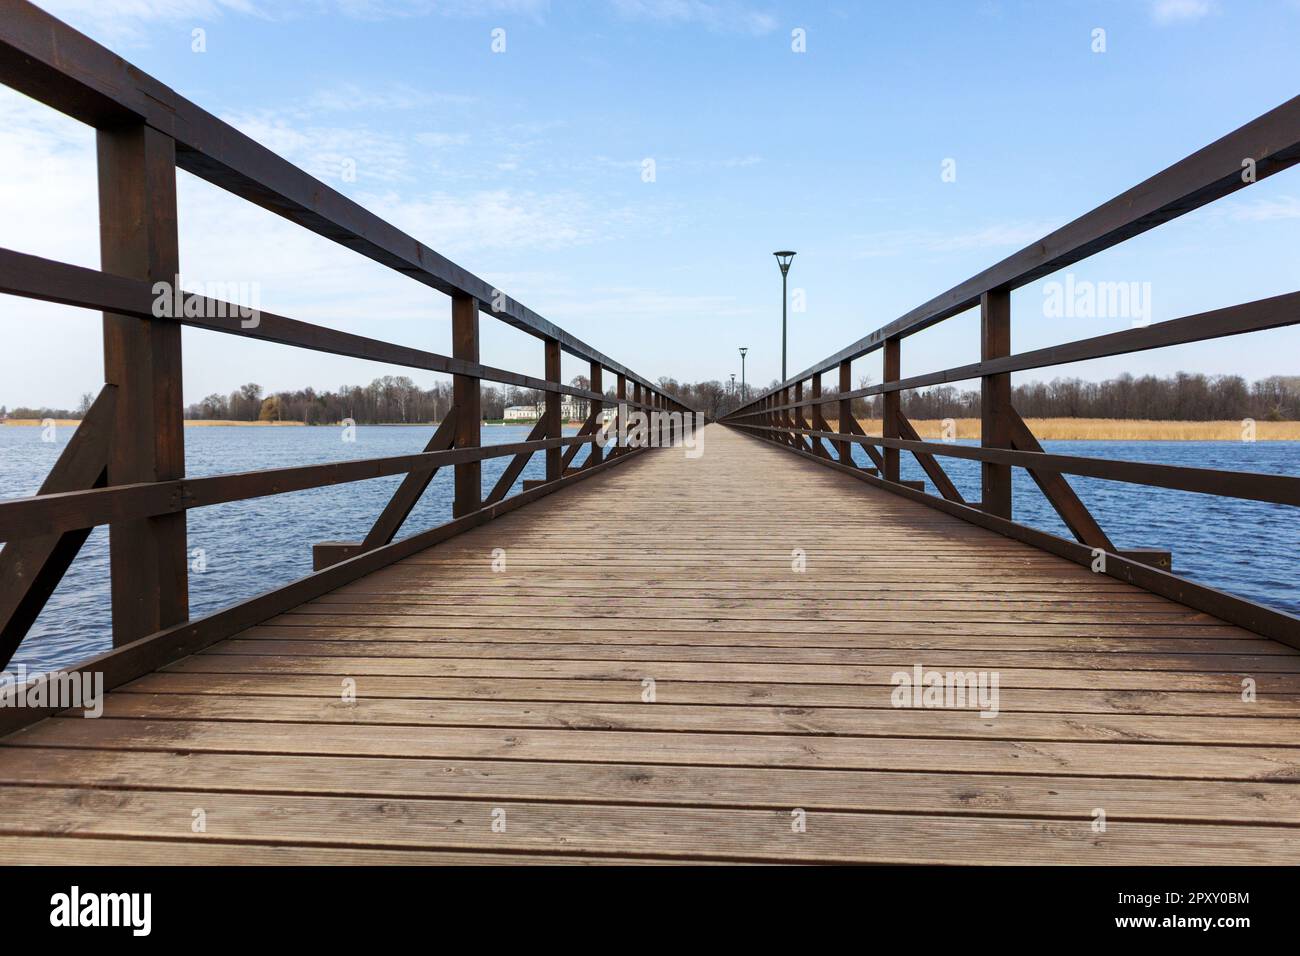 A wooden pier with a blue sky and clouds Stock Photo